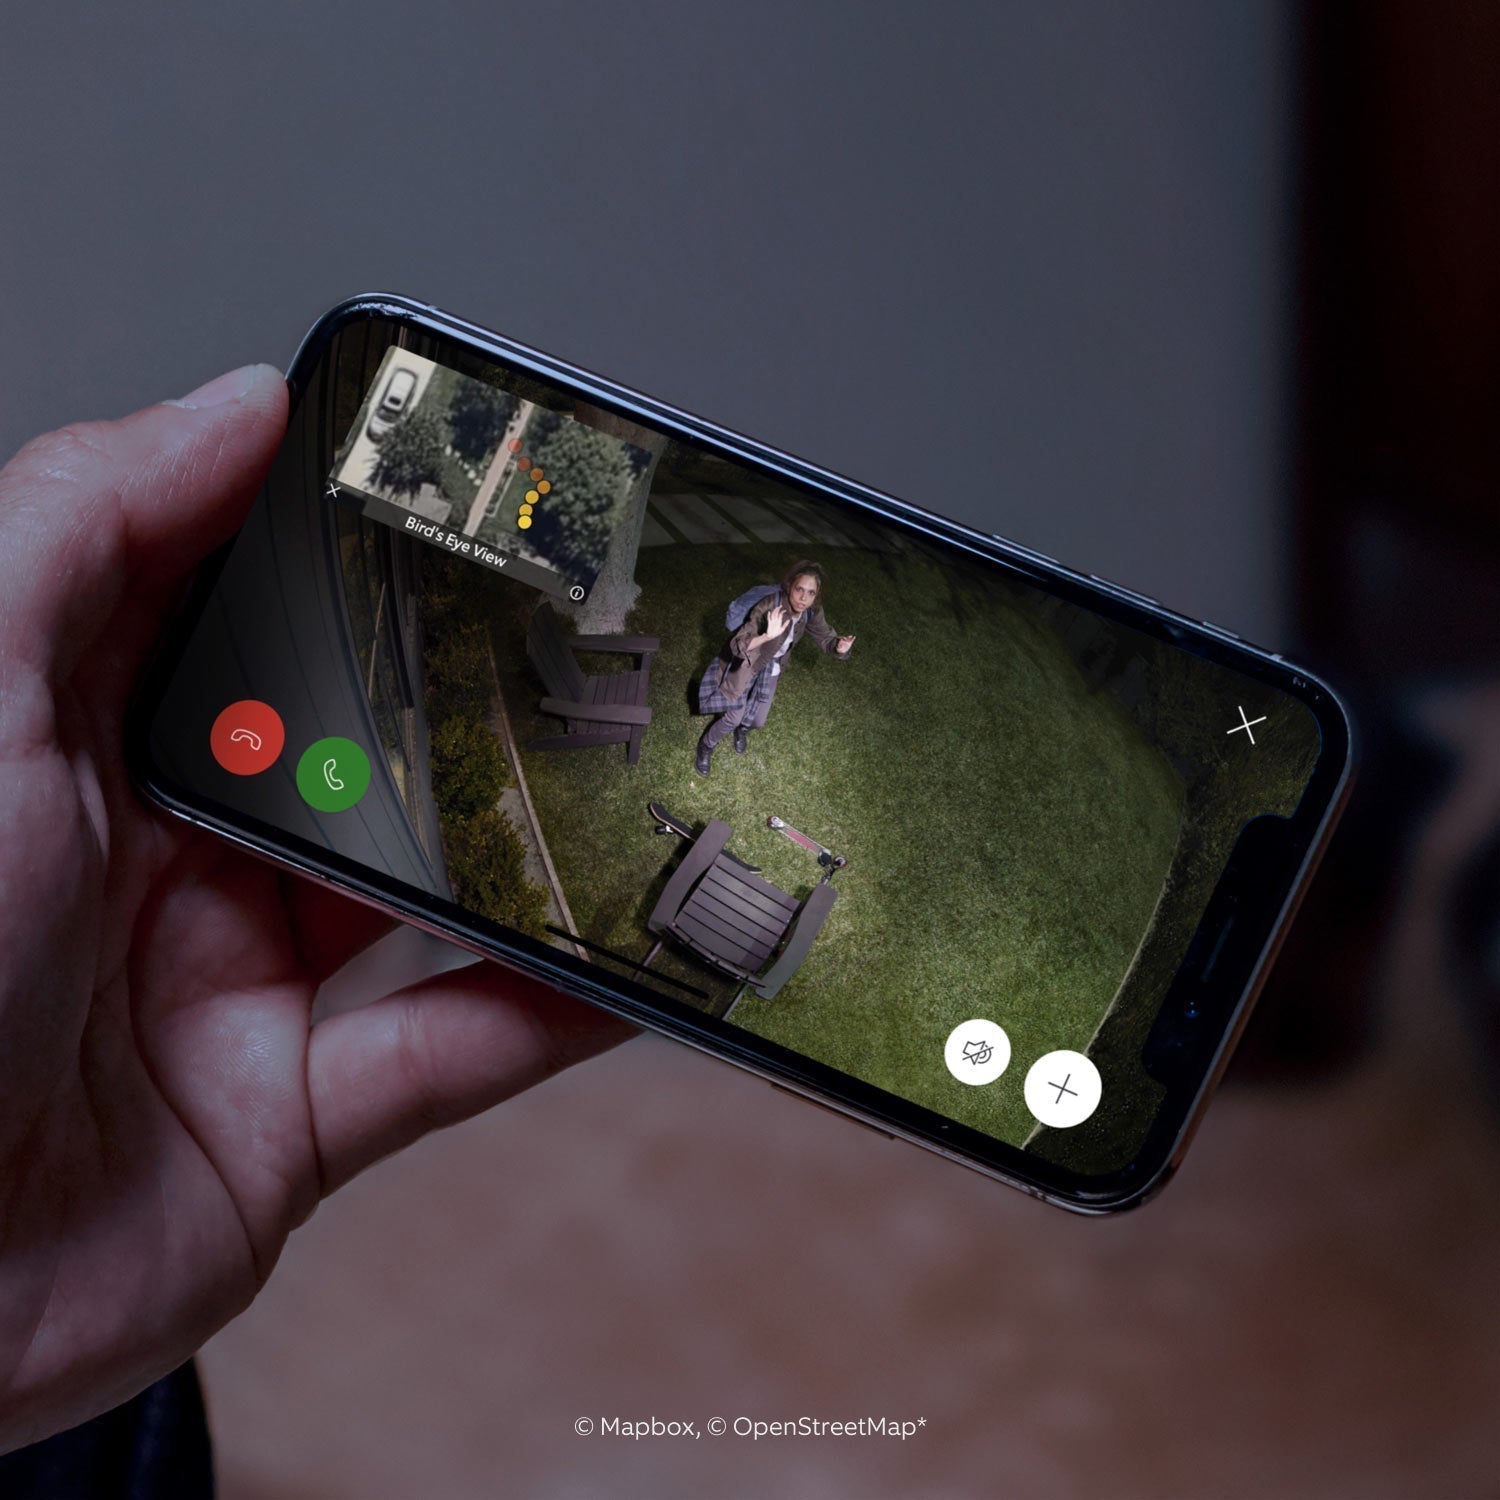 2-Pack Spotlight Cam Pro (Plug-In) - Close-up of smartphone showing video of a person in a yard, looking up into Spotlight Cam Pro camera. Inset is bird's eye view perspective.